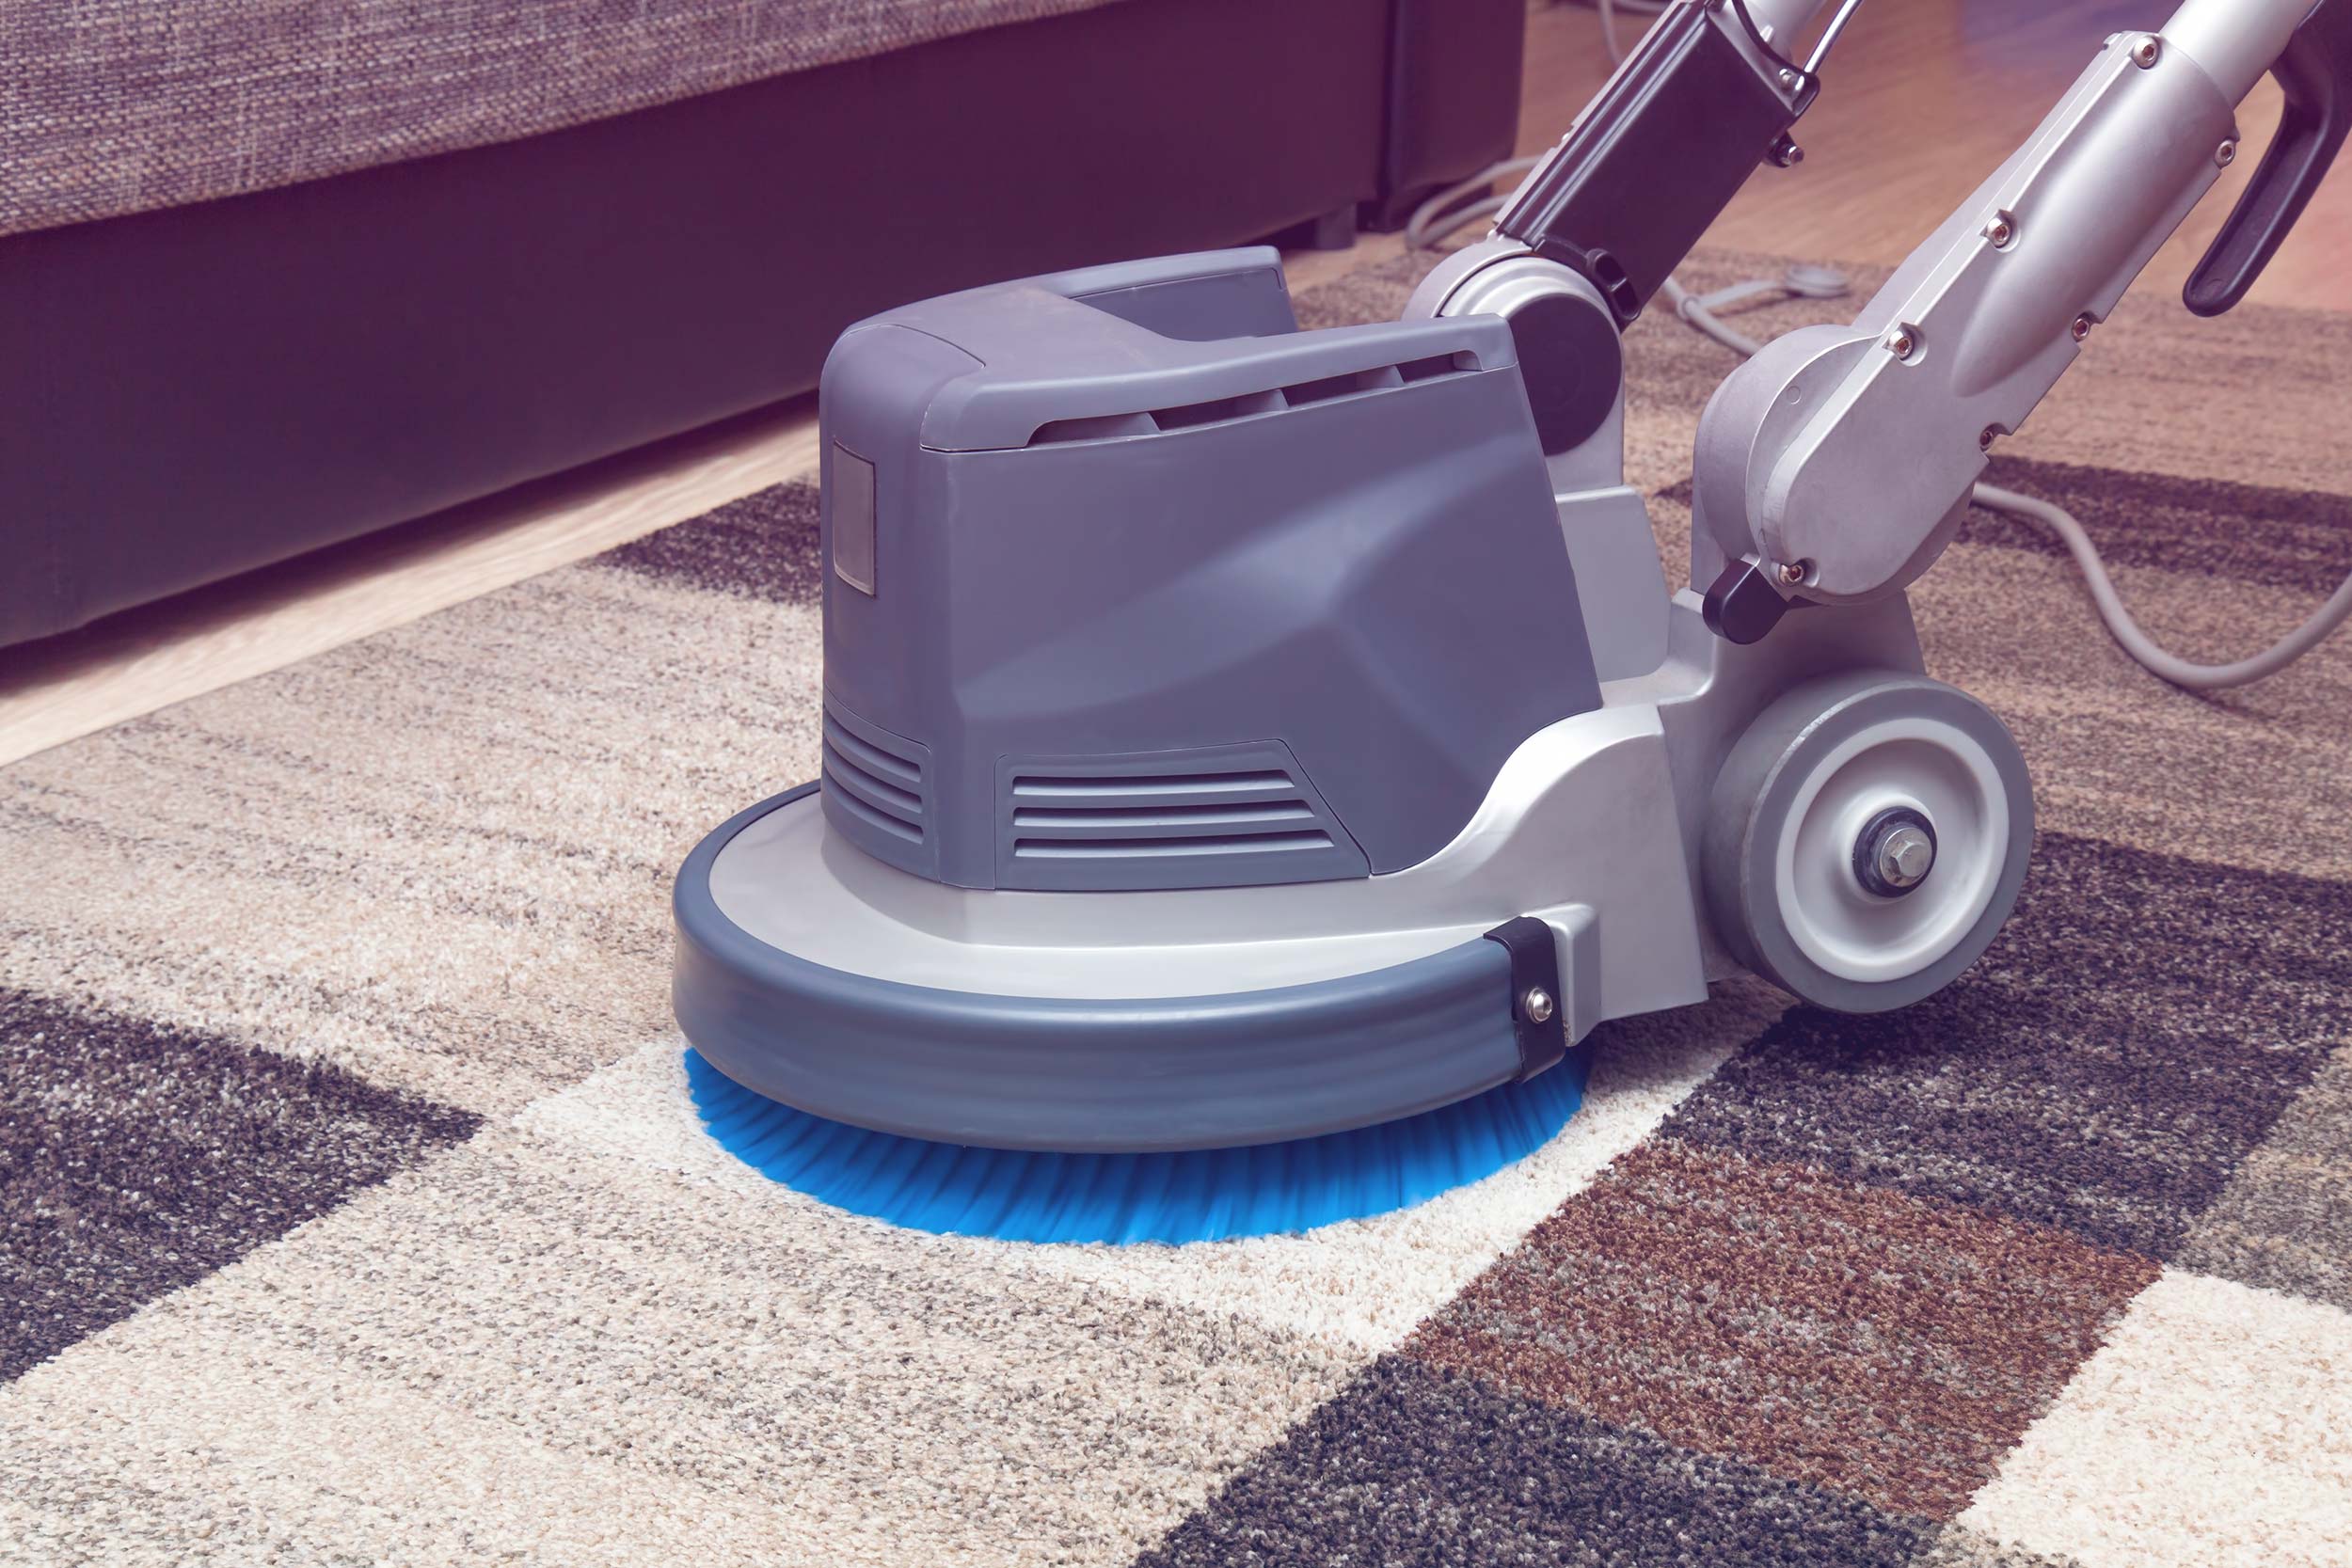 Carpet Cleaning - 10 Secrets to Making Carpets Look like New